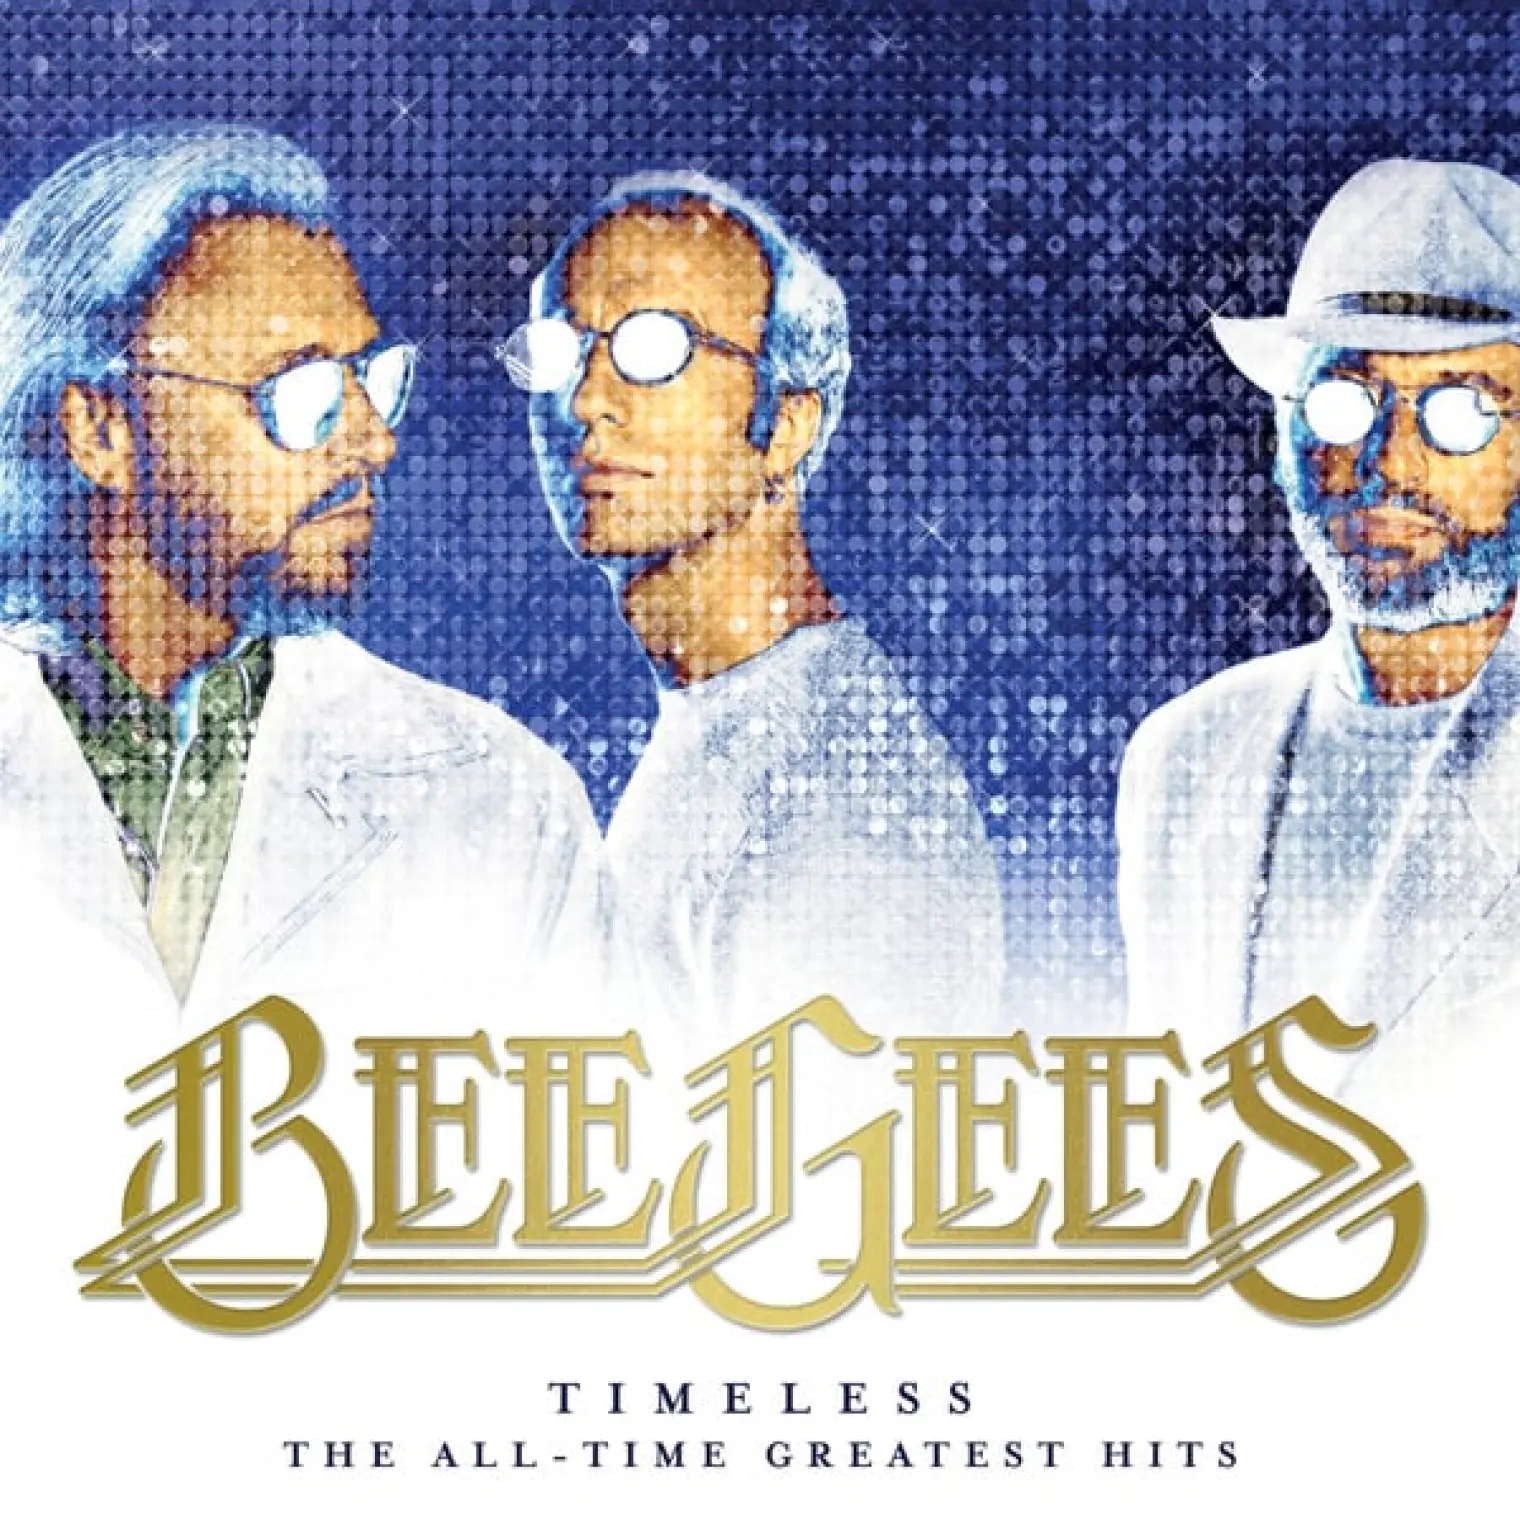 Timeless - The All-Time Greatest Hits -  Bee Gees 